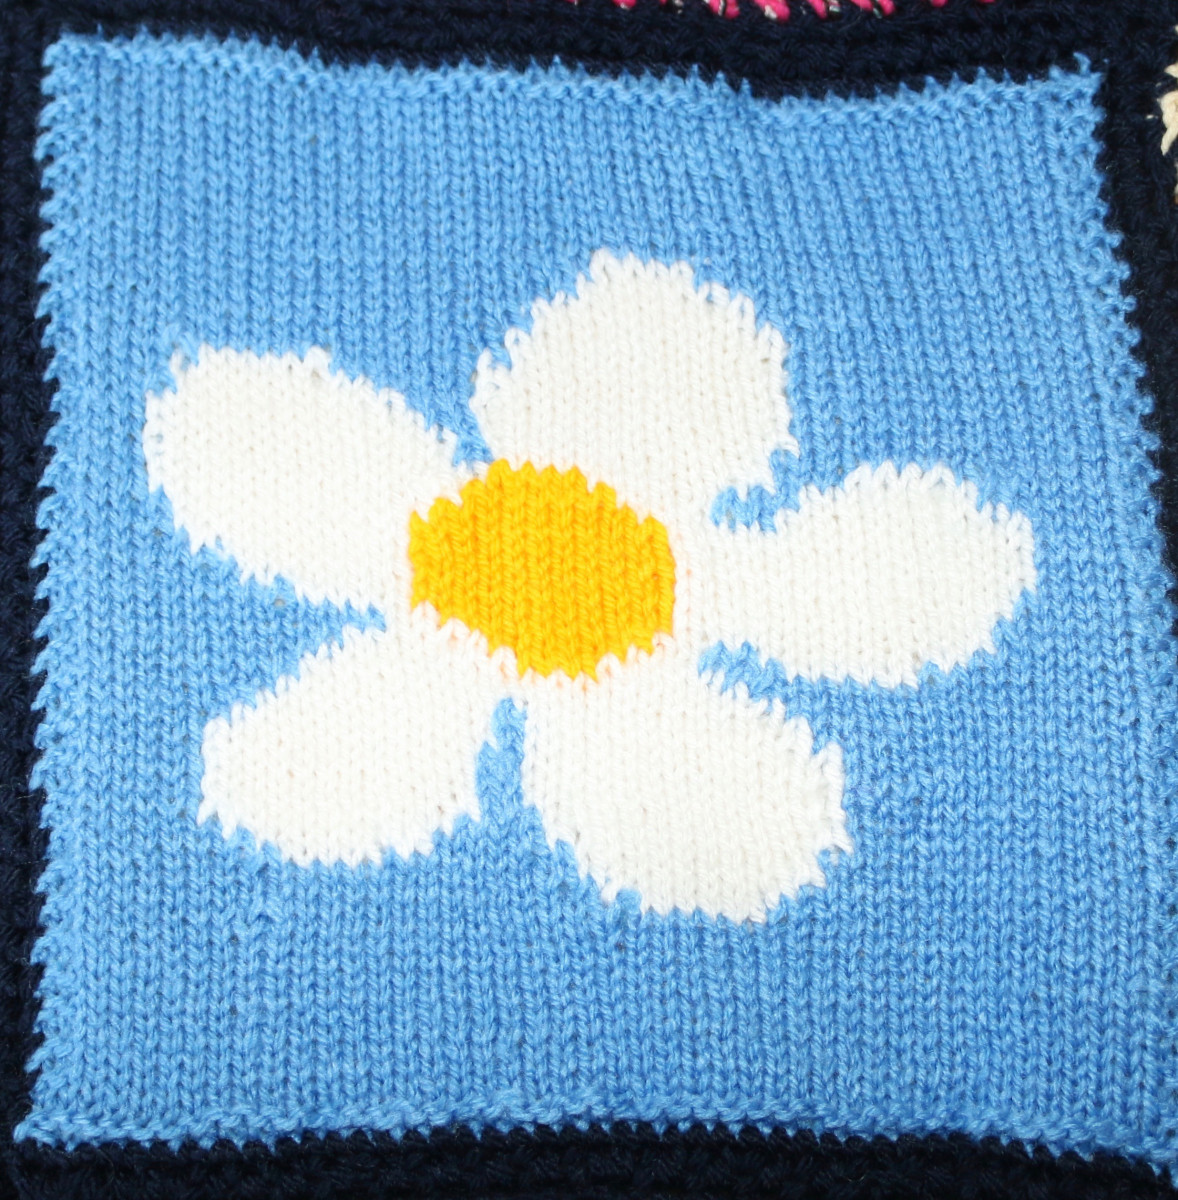 Knitted square of a large white flower on a pale blue background